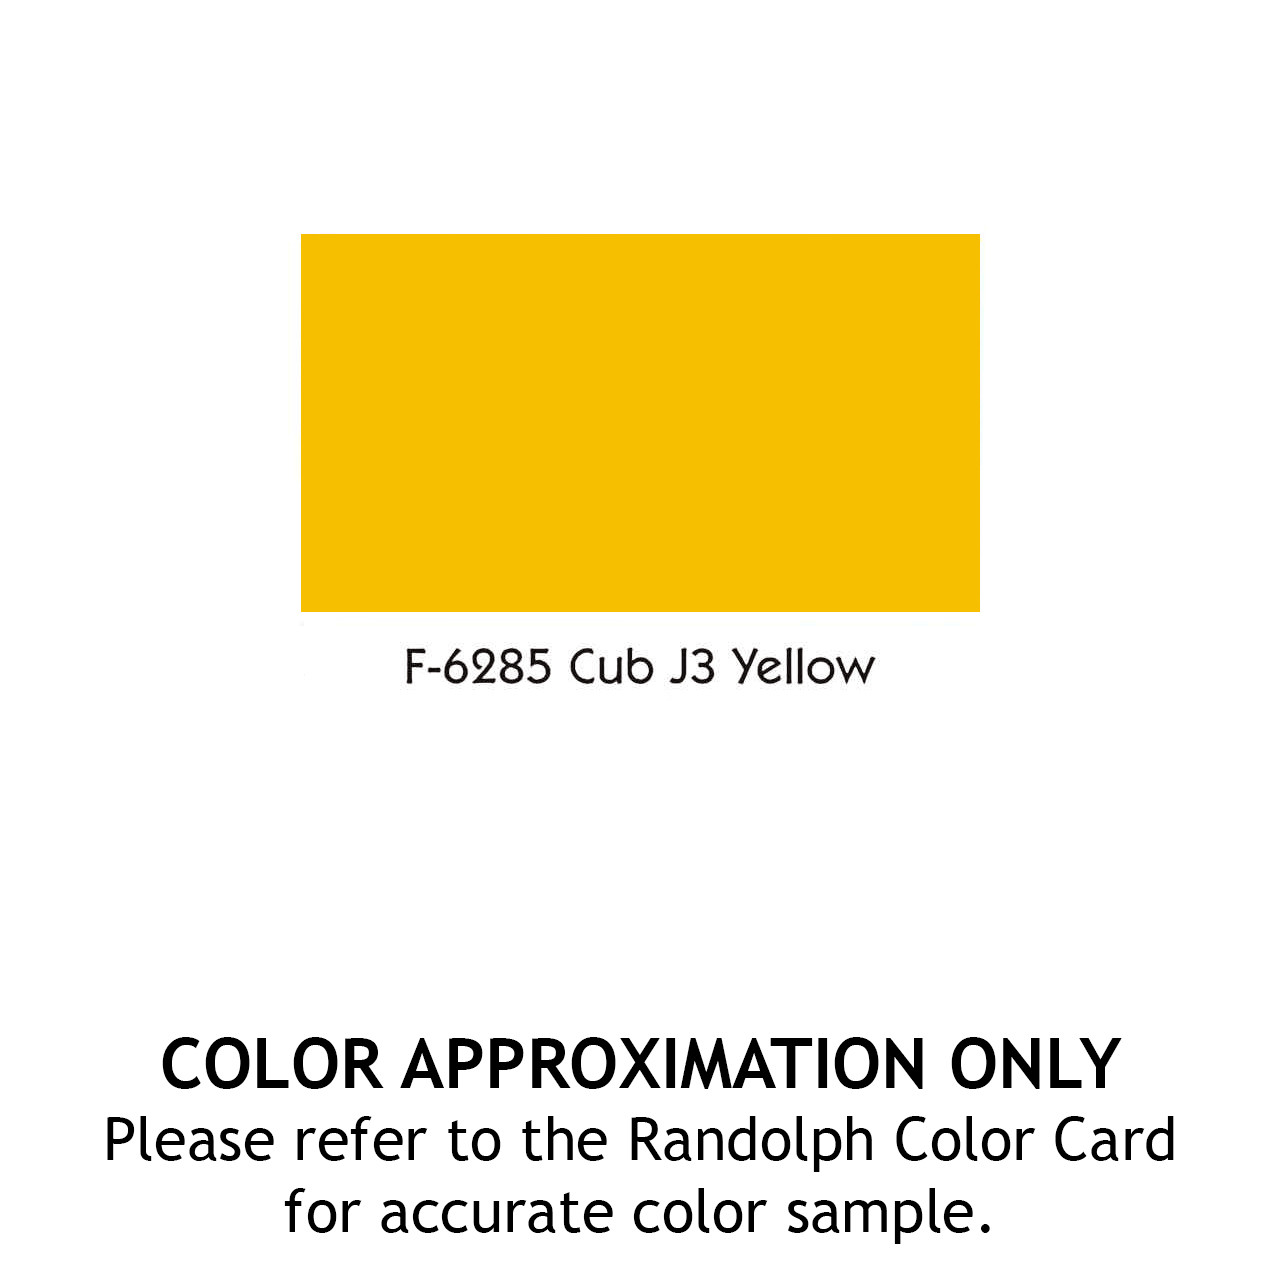 RANDOLPH COLORED BUTYRATE DOPE - CUB J3 YELLOW